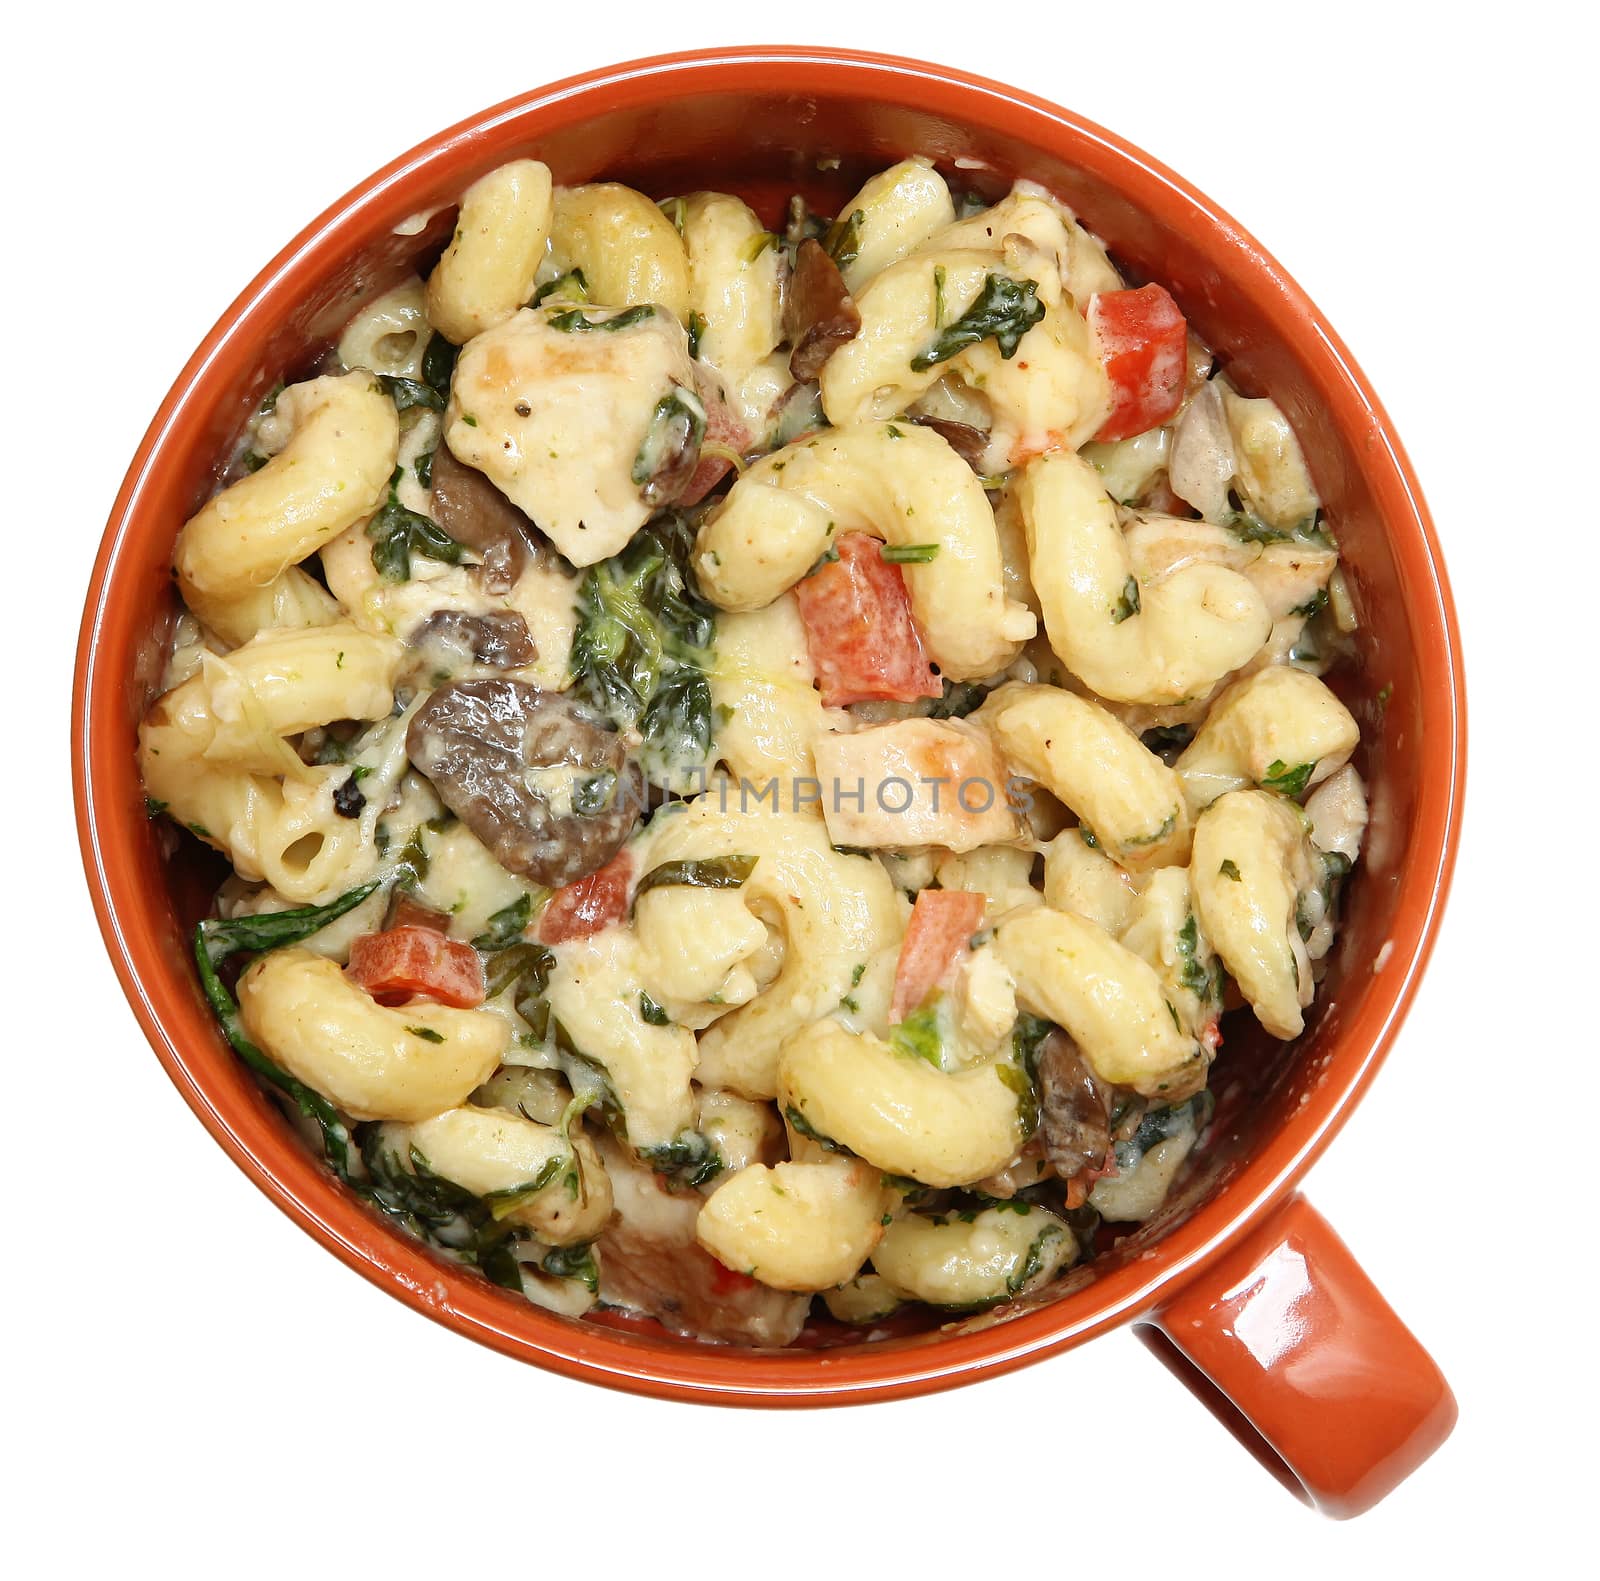 Tuscan Chicken Pasta in Ceramic Bowl isolated over white.